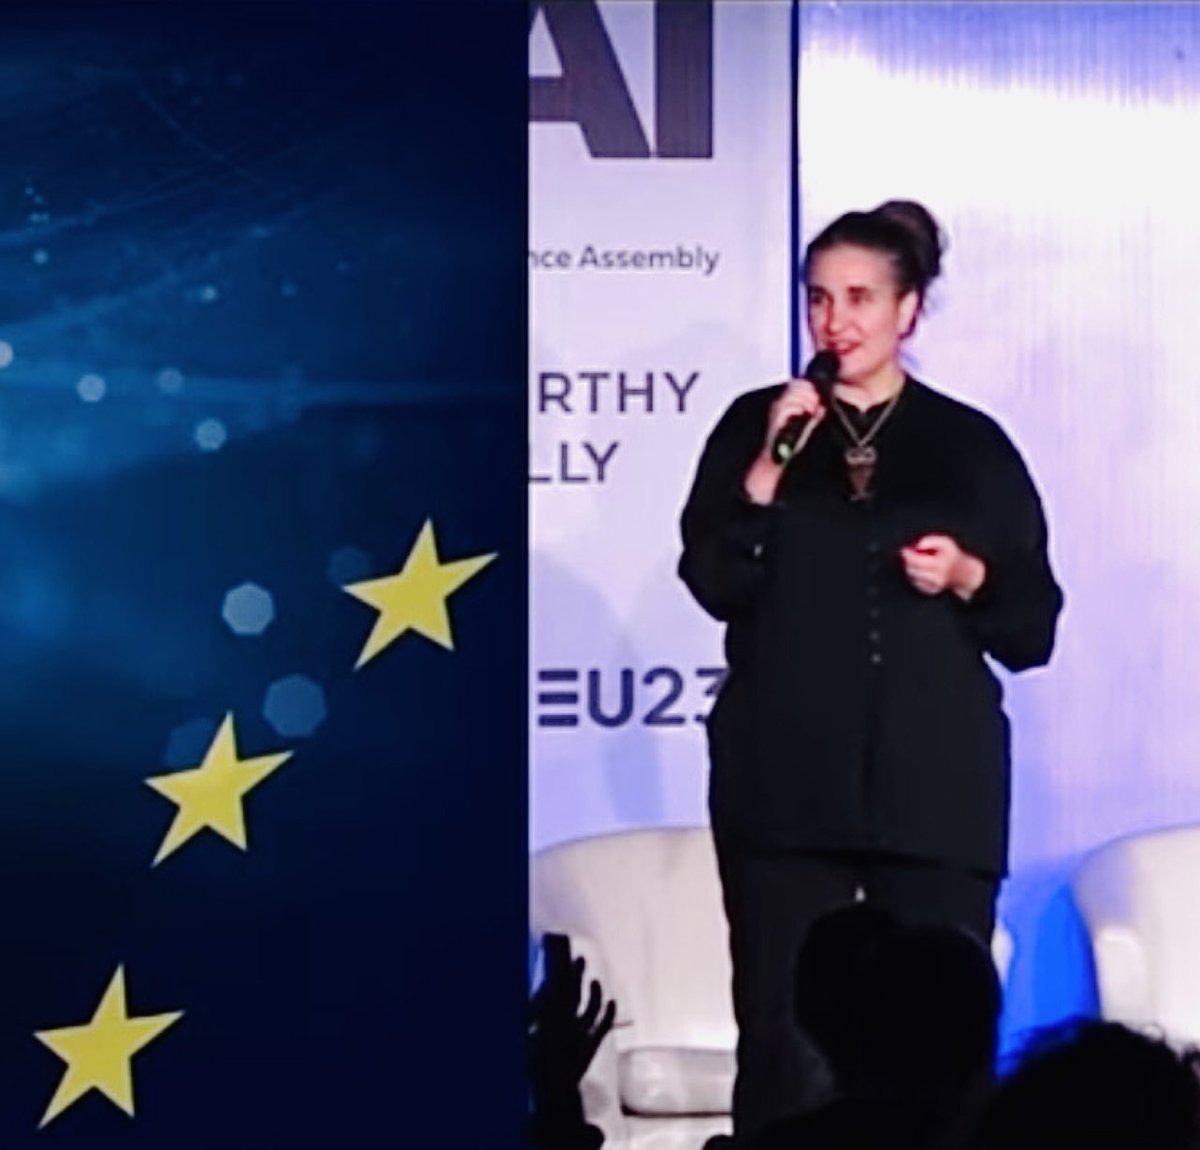 Honored to have been invited to the #aialliance by #eu and the Spanish Government - talking about art and AI & exhibiting digital artworks co-created with AI together with artist @idakvetny inMadrid. So many good talks, conversations, networks and new insights. Thank you